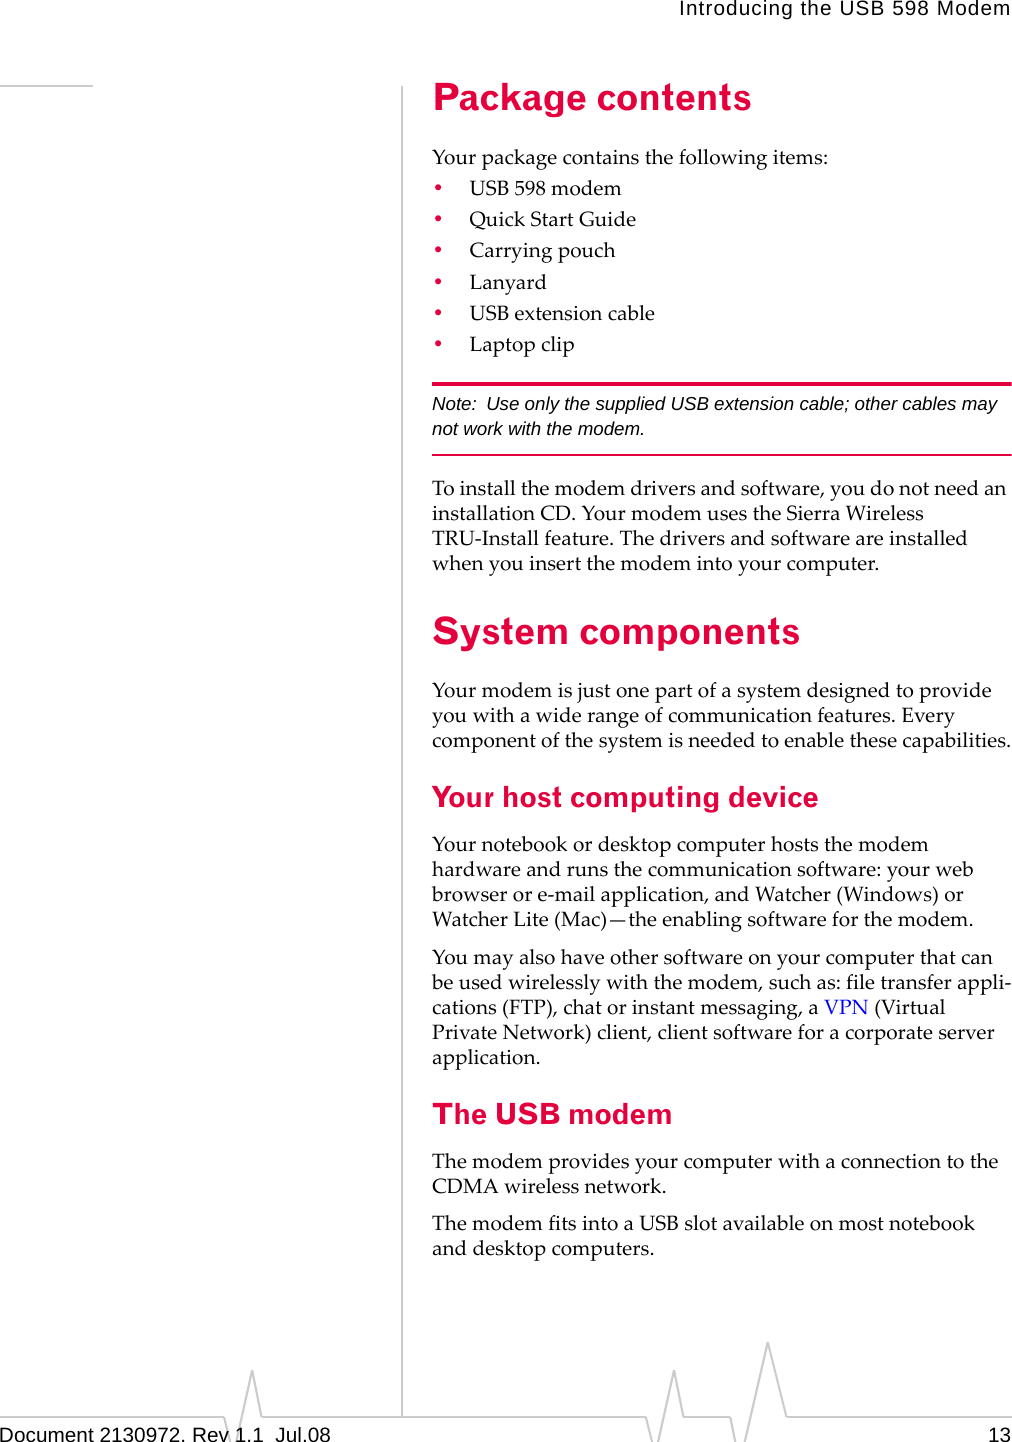 Introducing the USB 598 ModemDocument 2130972. Rev 1.1  Jul.08 13Package contentsYourpackagecontainsthefollowingitems:•USB 598modem•QuickStartGuide•Carryingpouch•Lanyard•USBextensioncable•LaptopclipNote: Use only the supplied USB extension cable; other cables may not work with the modem.Toinstallthemodemdriversandsoftware,youdonotneedaninstallationCD.YourmodemusestheSierraWirelessTRU‐Installfeature.Thedriversandsoftwareareinstalledwhenyouinsertthemodemintoyourcomputer.System componentsYourmodemisjustonepartofasystemdesignedtoprovideyouwithawiderangeofcommunicationfeatures.Everycomponentofthesystemisneededtoenablethesecapabilities.Your host computing deviceYournotebookordesktopcomputerhoststhemodemhardwareandrunsthecommunicationsoftware:yourwebbrowserore‐mailapplication,andWatcher(Windows)orWatcherLite(Mac)—theenablingsoftwareforthemodem.Youmayalsohaveothersoftwareonyourcomputerthatcanbeusedwirelesslywiththemodem,suchas:filetransferappli‐cations(FTP),chatorinstantmessaging,aVPN(VirtualPrivateNetwork)client,clientsoftwareforacorporateserverapplication.The USB modemThemodemprovidesyourcomputerwithaconnectiontotheCDMAwirelessnetwork.ThemodemfitsintoaUSBslotavailableonmostnotebookanddesktopcomputers.